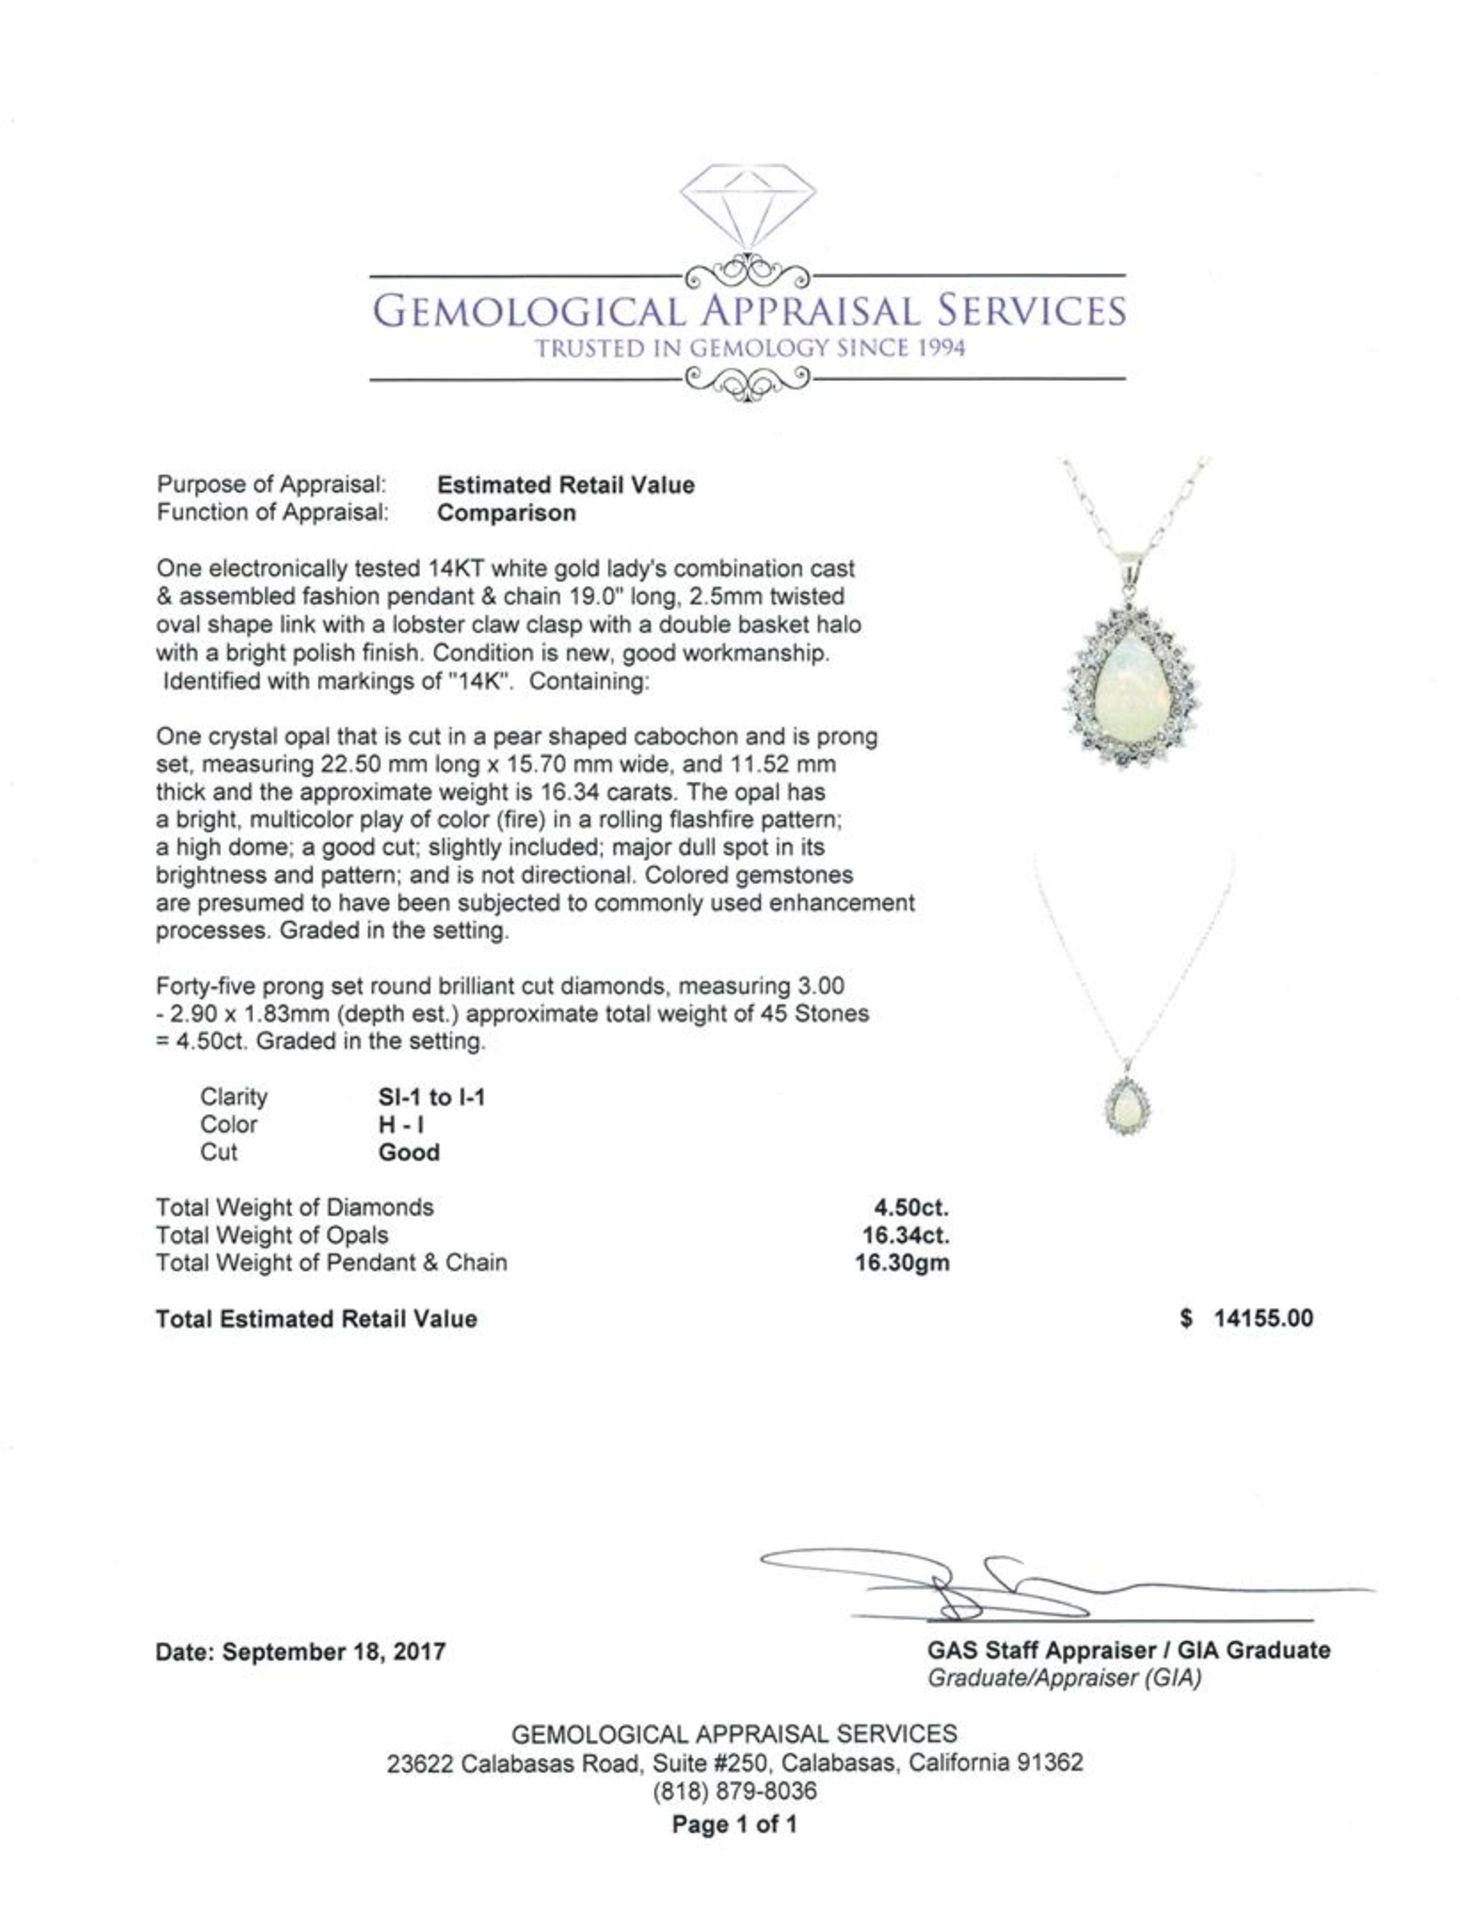 16.34 ctw Opal And Diamond Pendant & Chain - 14KT White Gold - Image 3 of 3